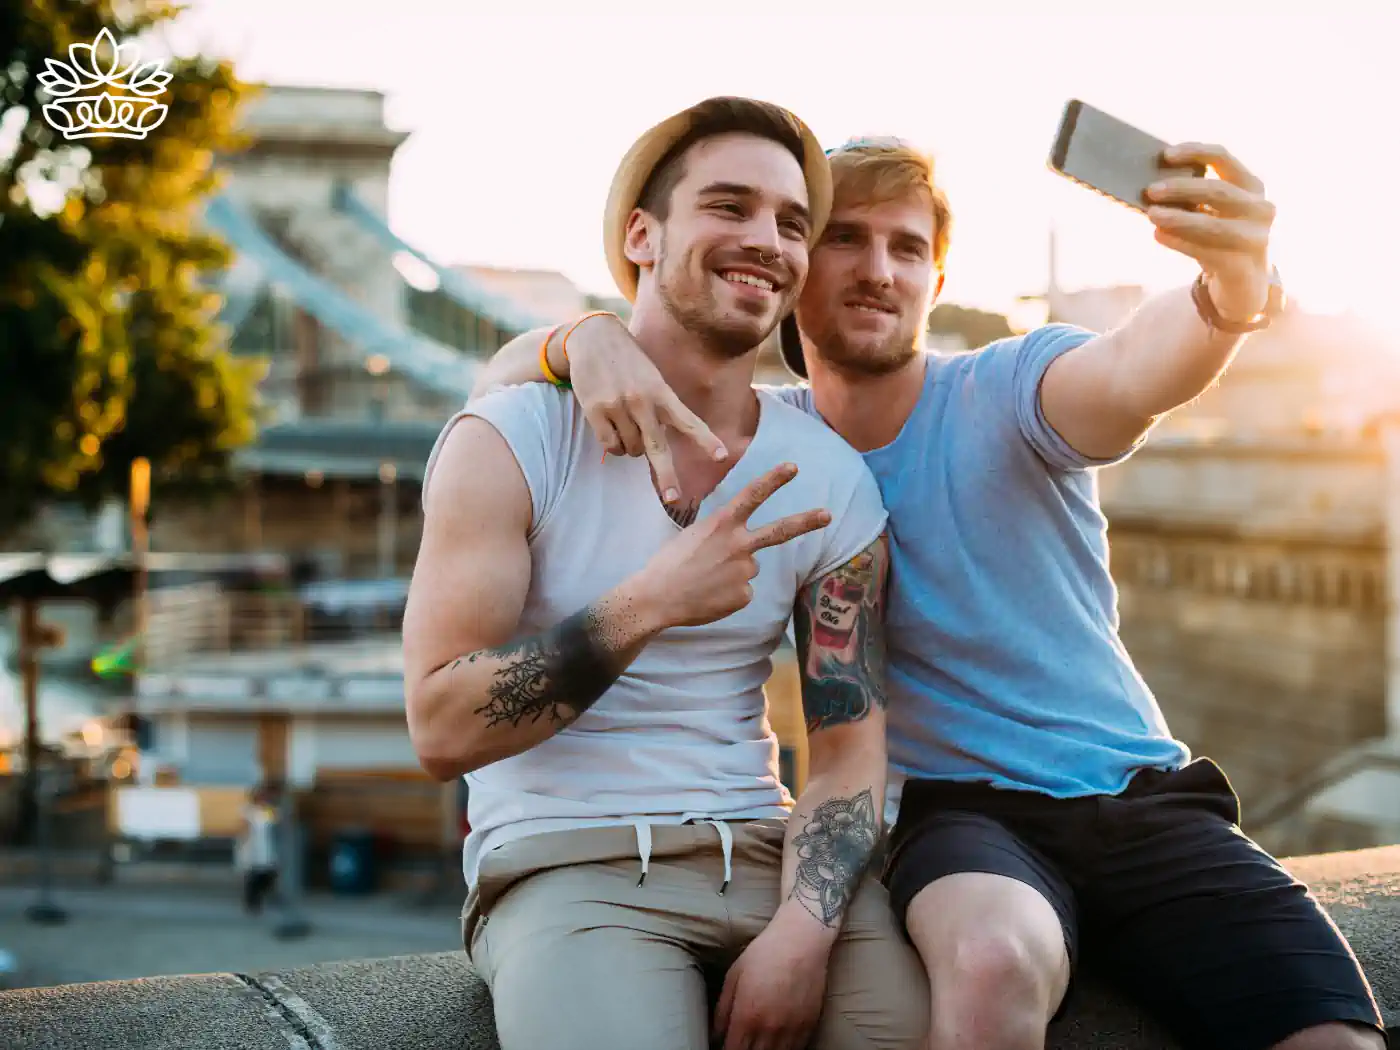 Two men taking a selfie, enjoying a sunny day outdoors, depicting happiness and love. Fabulous Flowers and Gifts - Pride Collection.